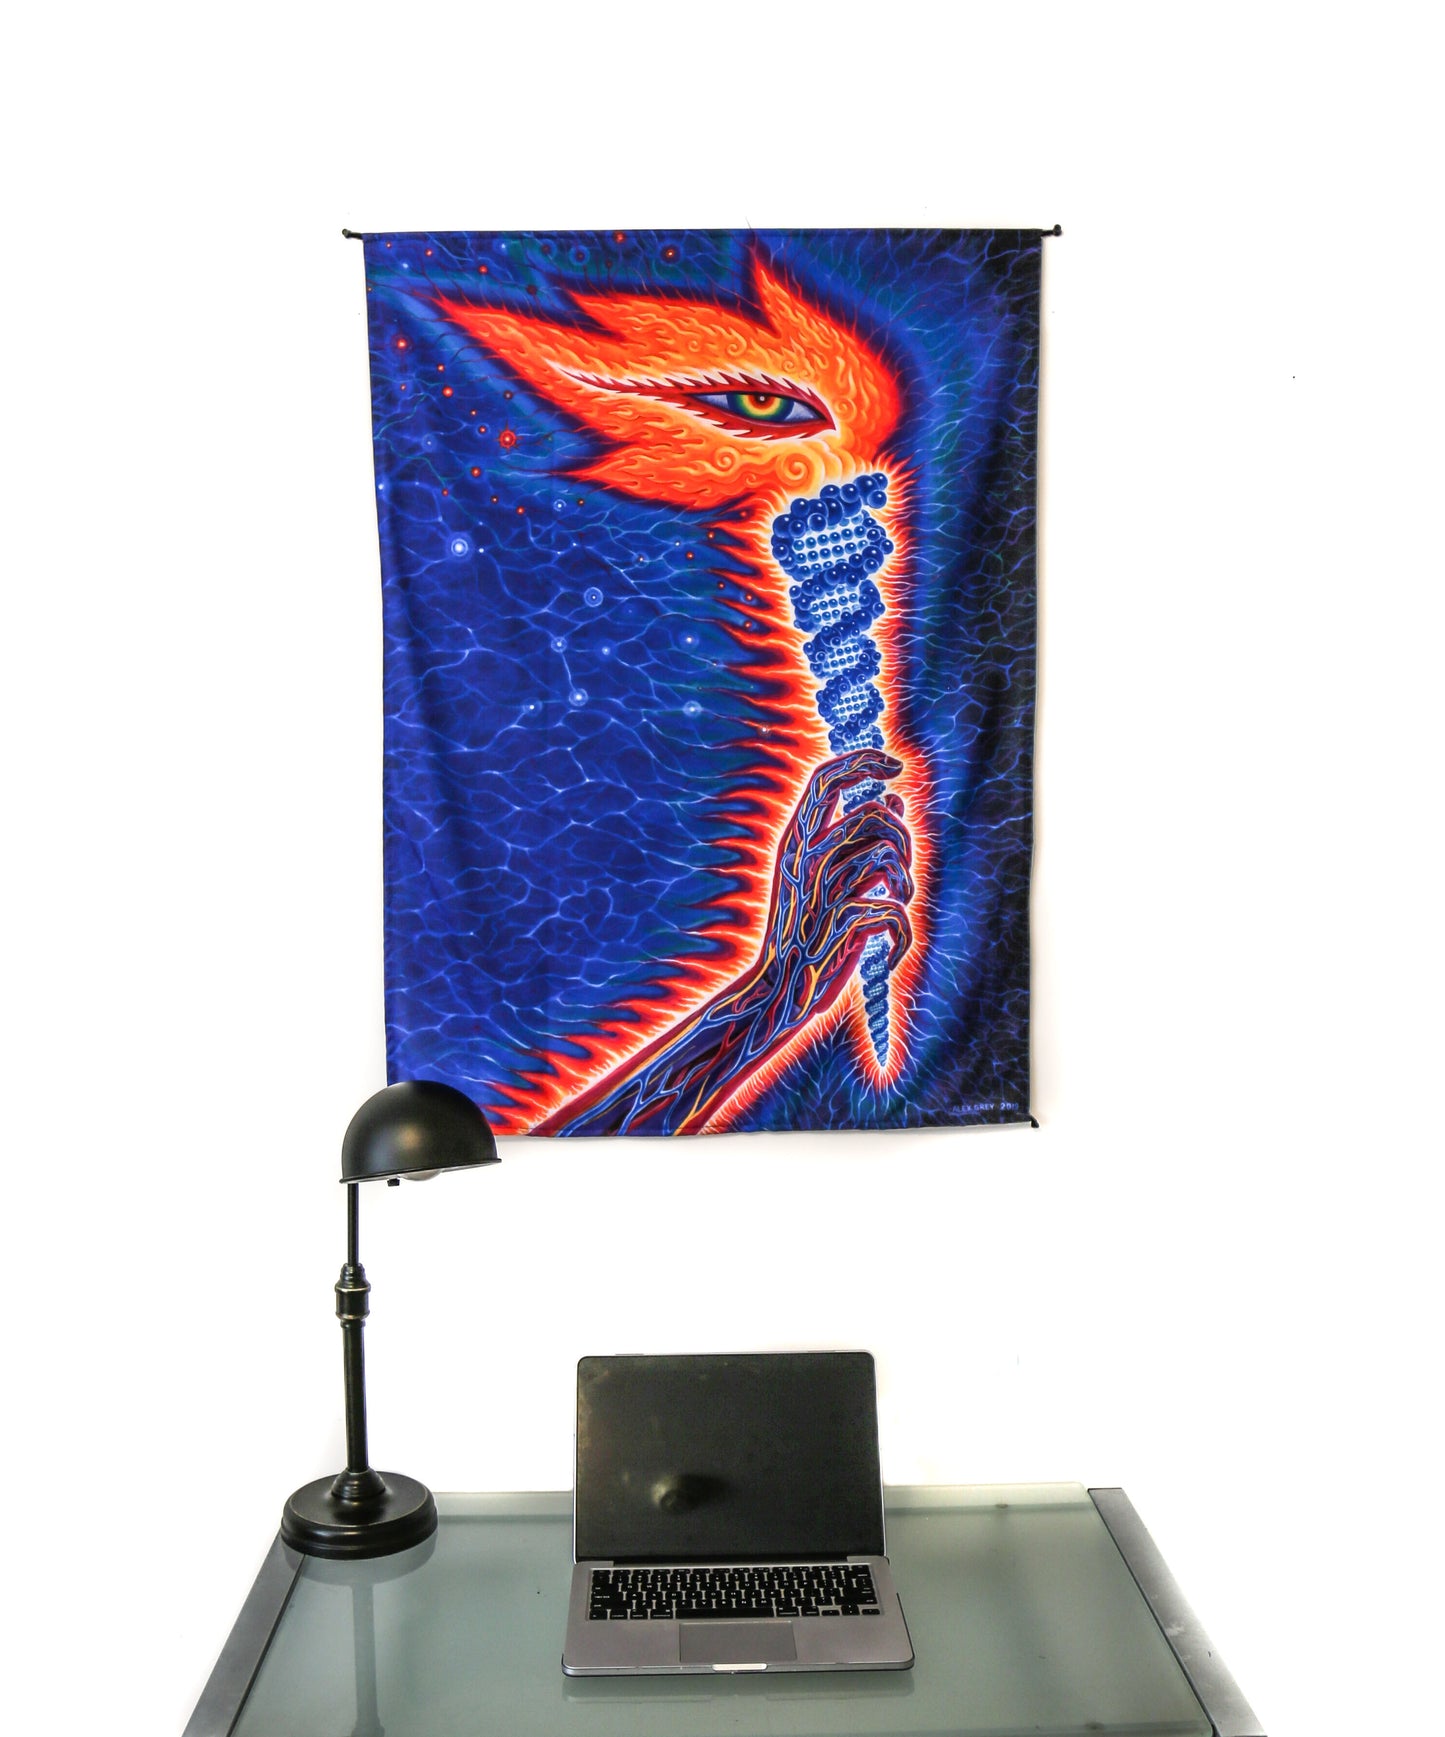 The Torch - Tapestry